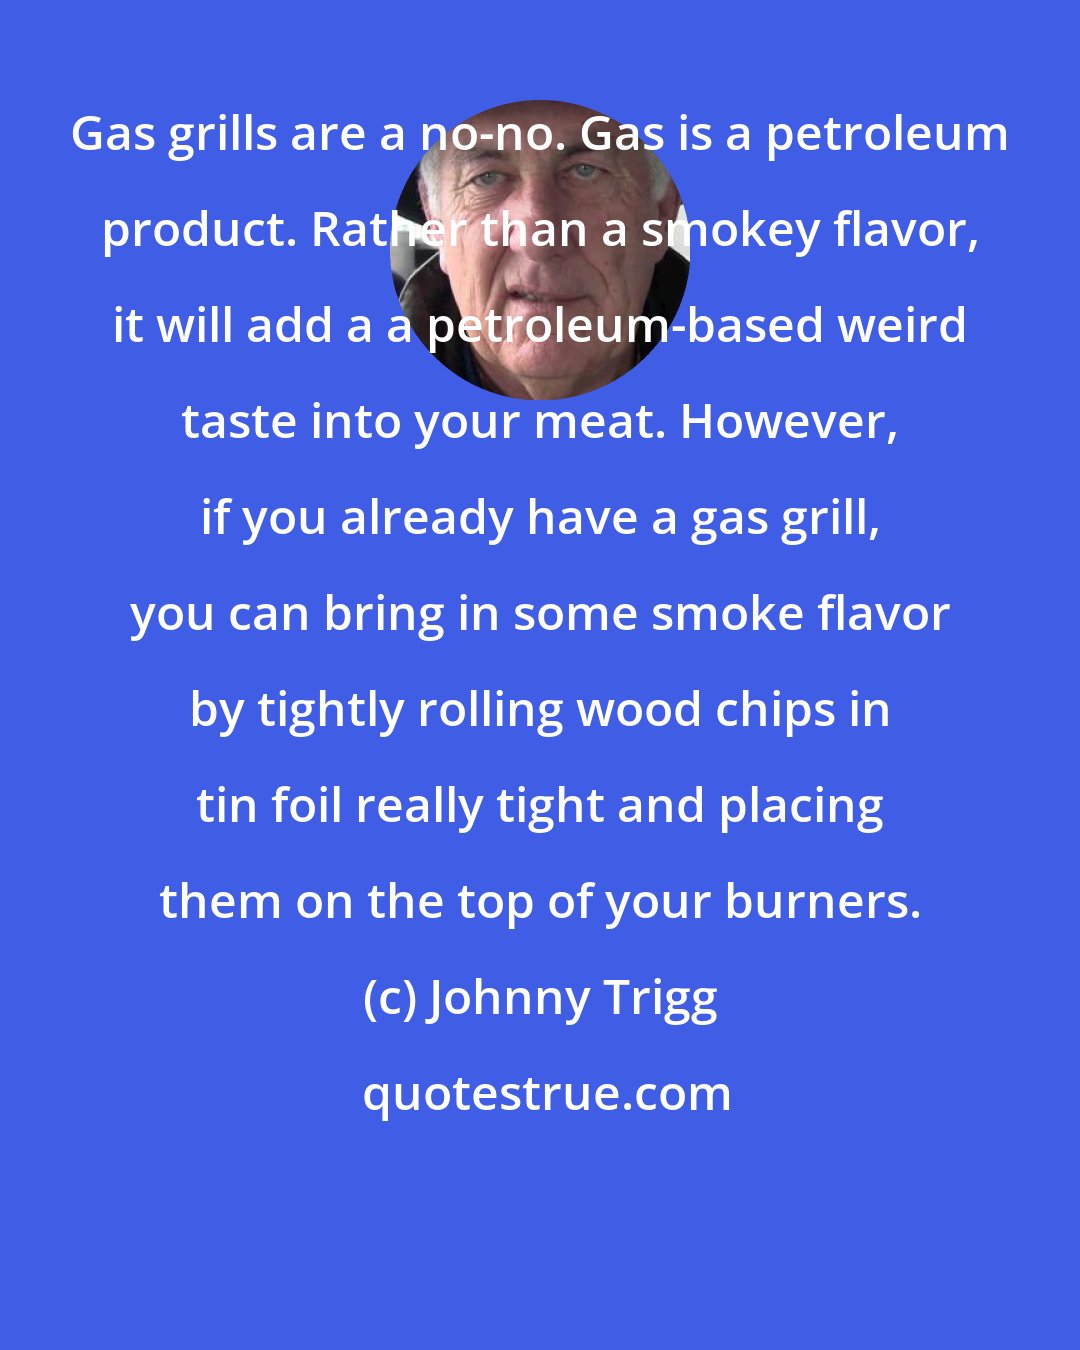 Johnny Trigg: Gas grills are a no-no. Gas is a petroleum product. Rather than a smokey flavor, it will add a a petroleum-based weird taste into your meat. However, if you already have a gas grill, you can bring in some smoke flavor by tightly rolling wood chips in tin foil really tight and placing them on the top of your burners.